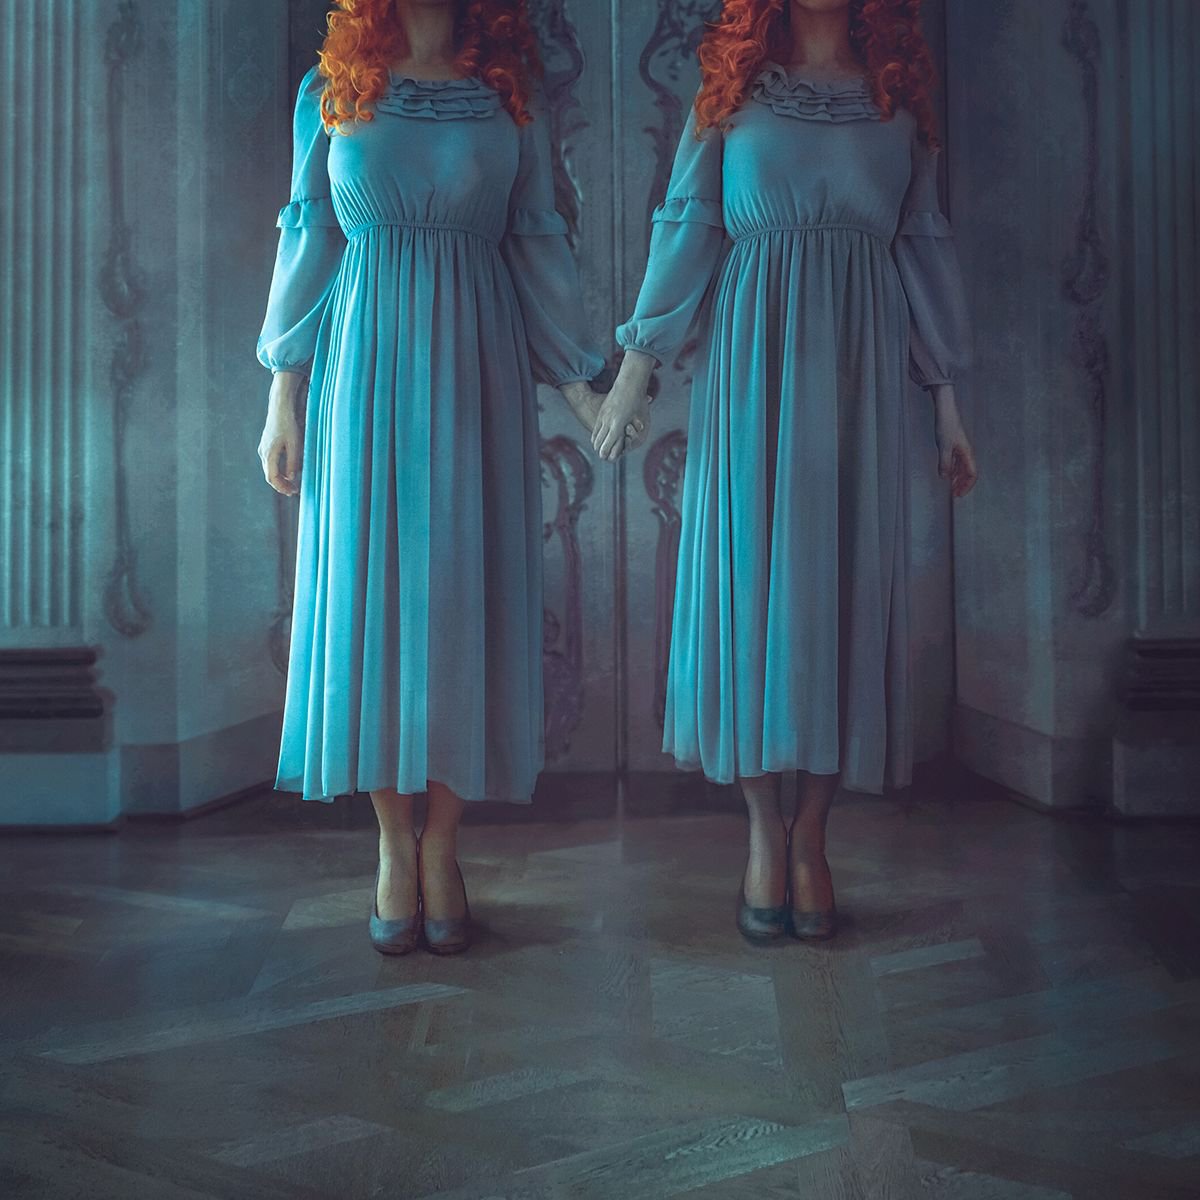 Two Sisters - limited edition of 7 by Nikolina Petolas